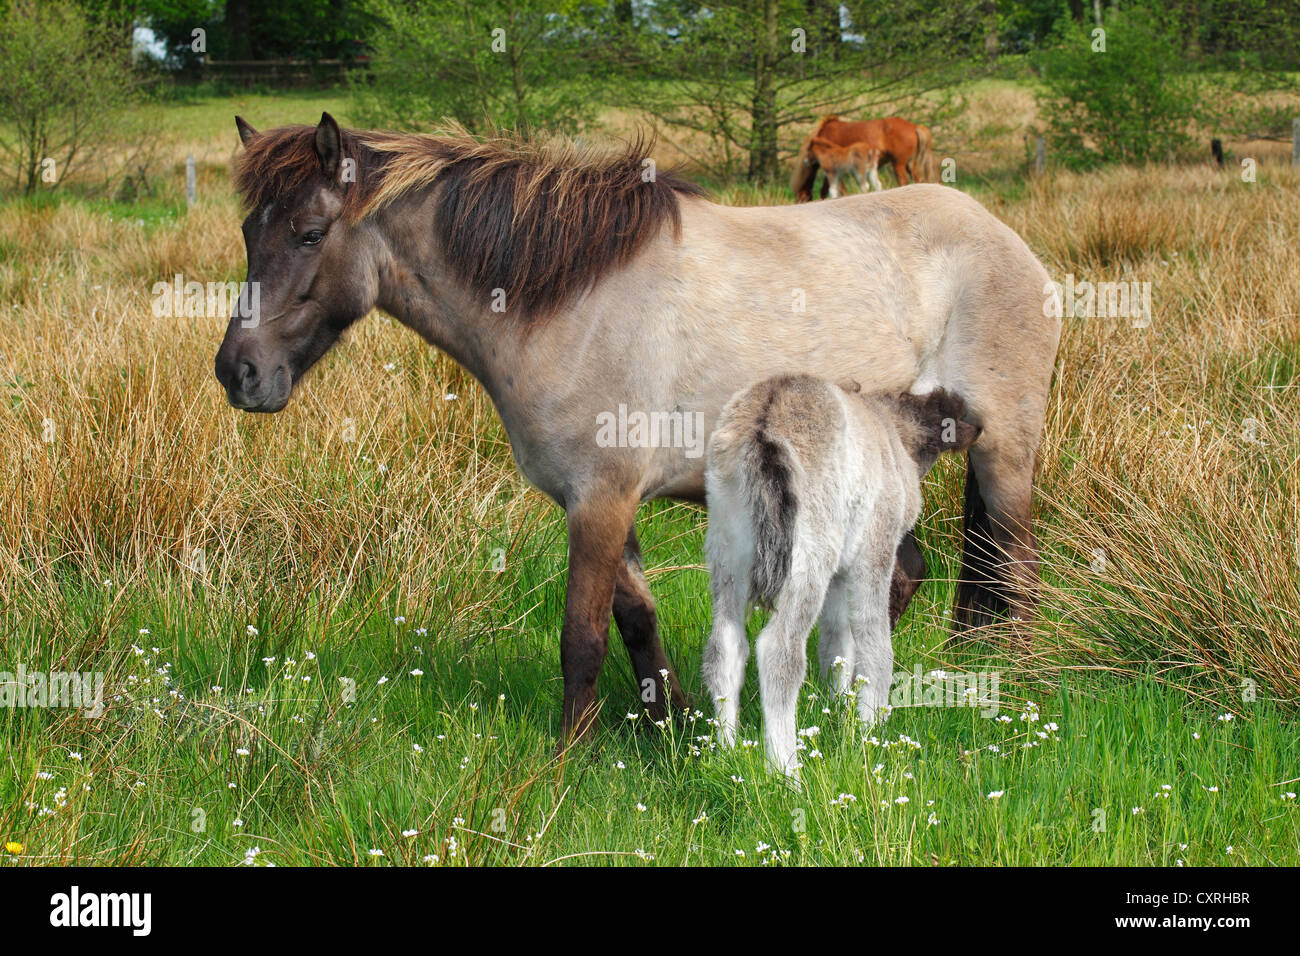 Mare suckling a foal, Icelandic Horse or Icelandic Pony Stock Photo